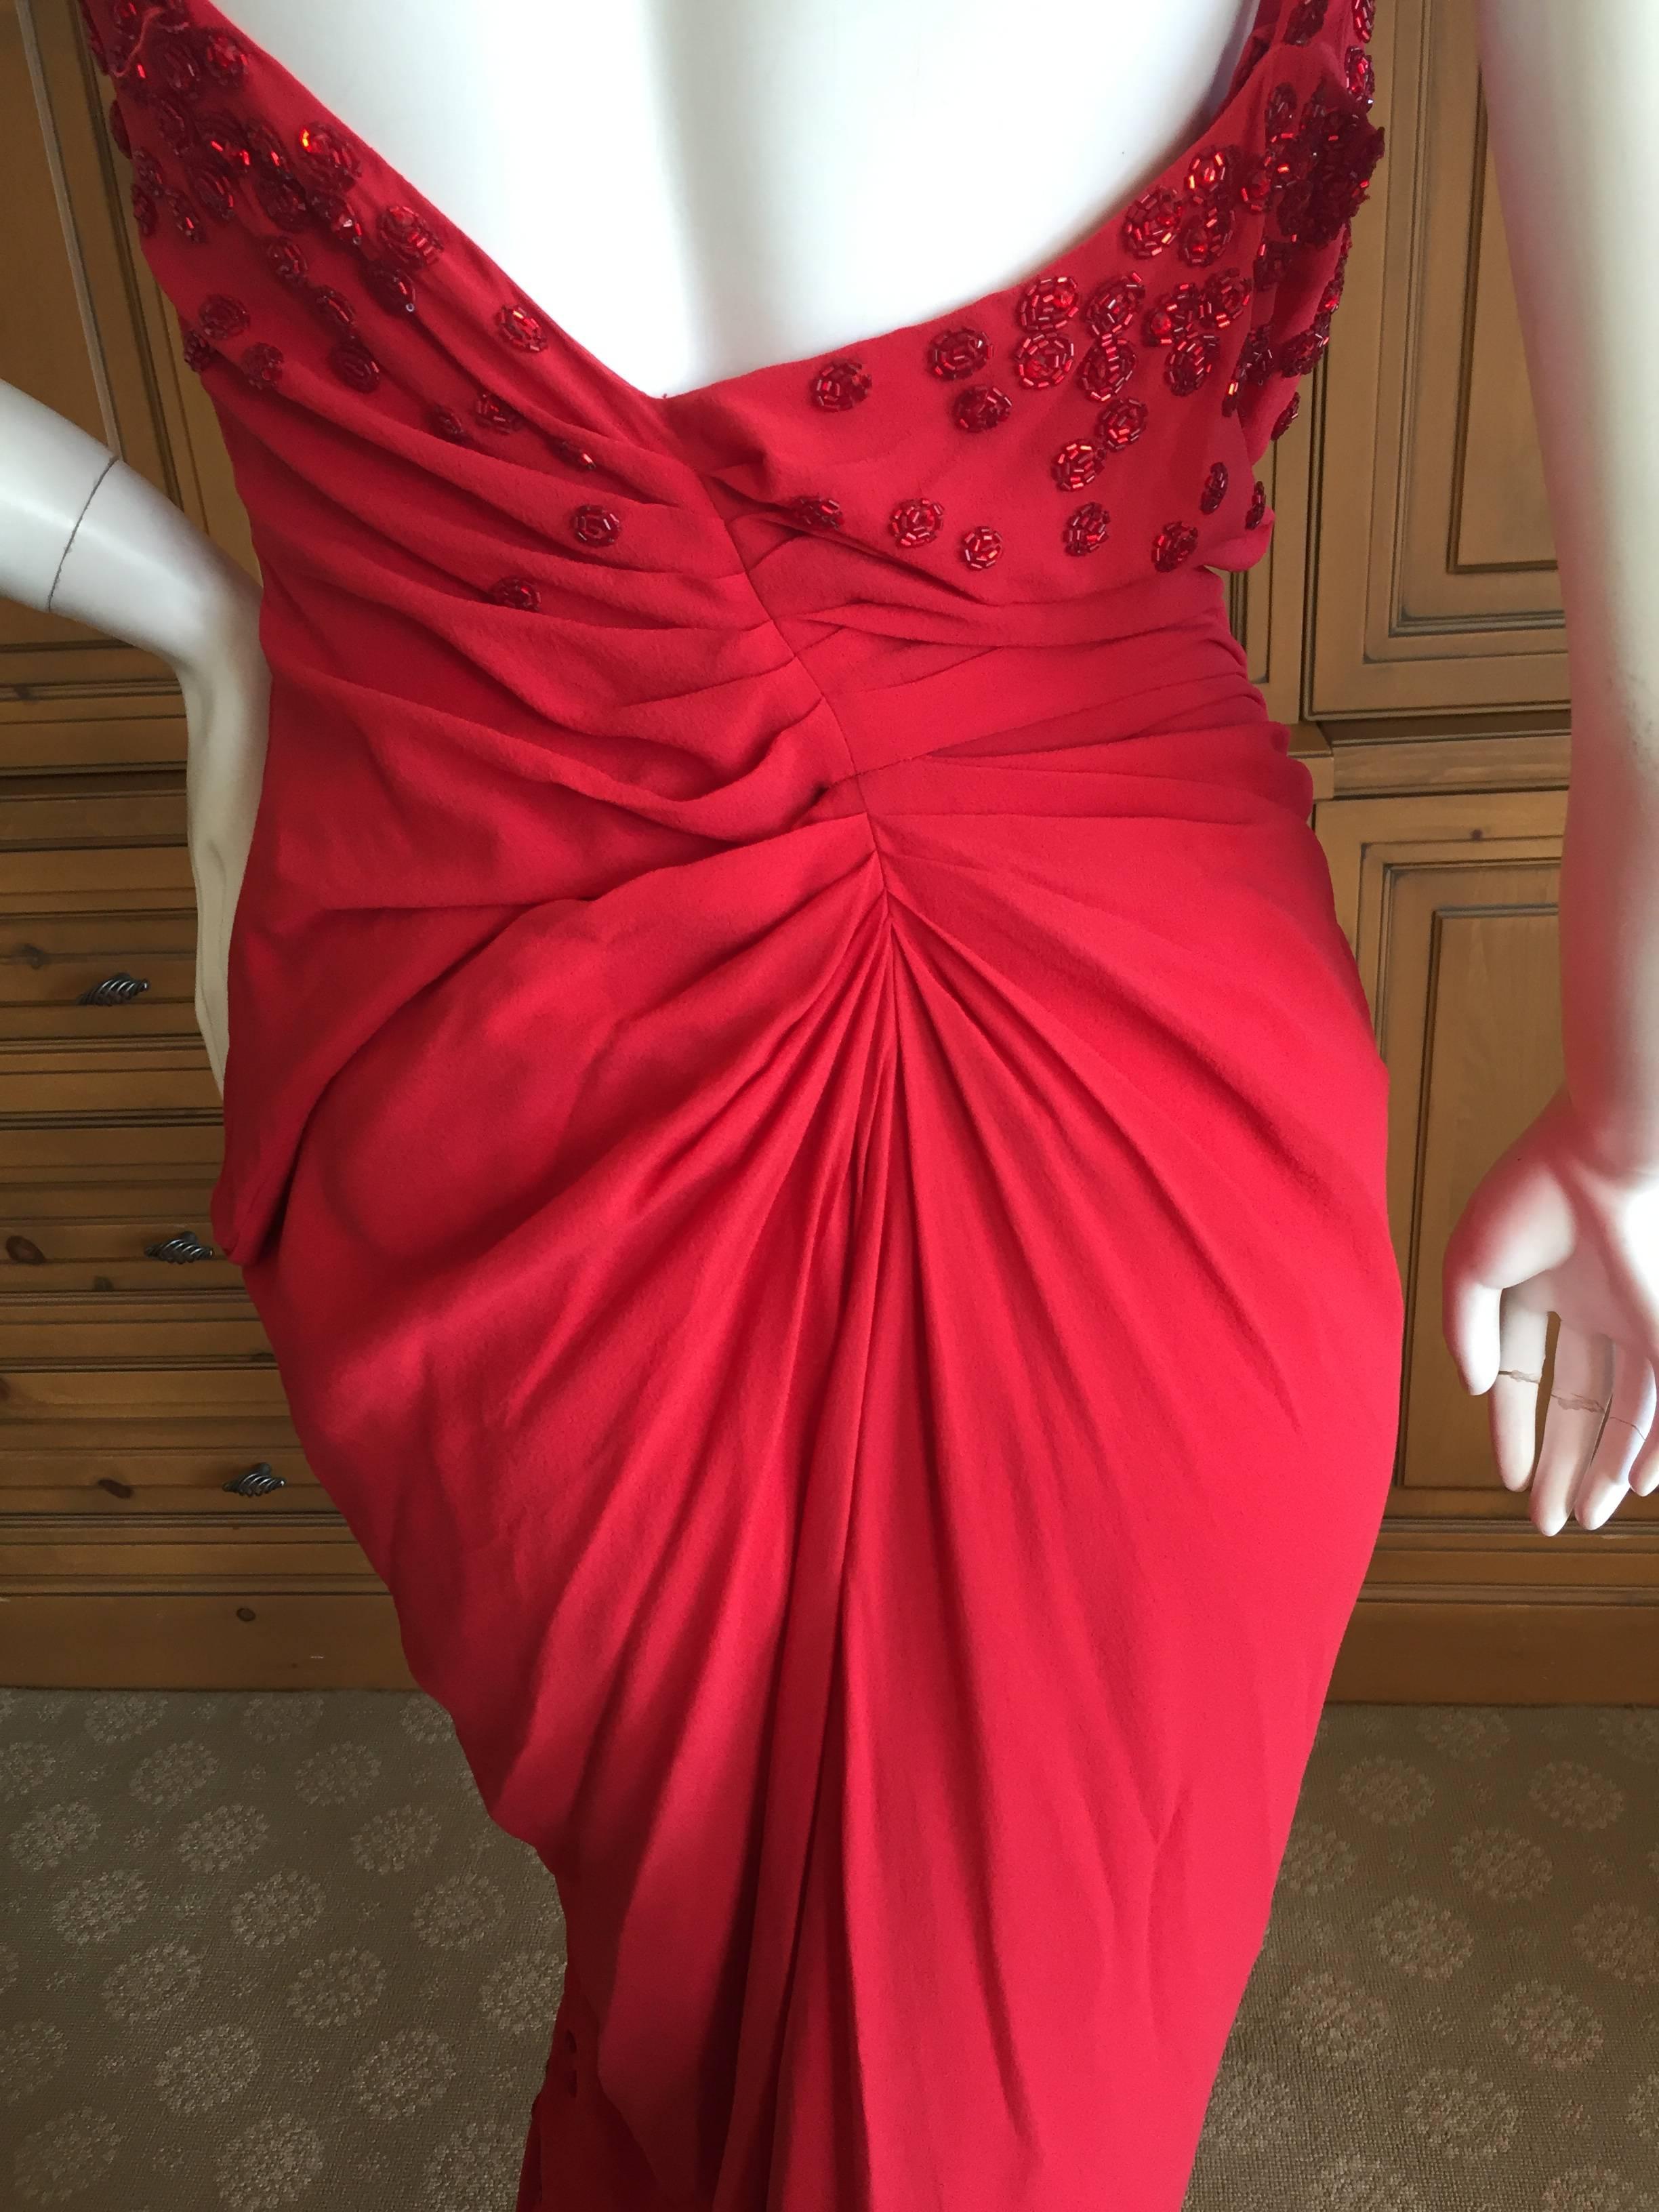 Christian Dior Lady in Red Fringed Beaded Evening Dress by Galliano 2